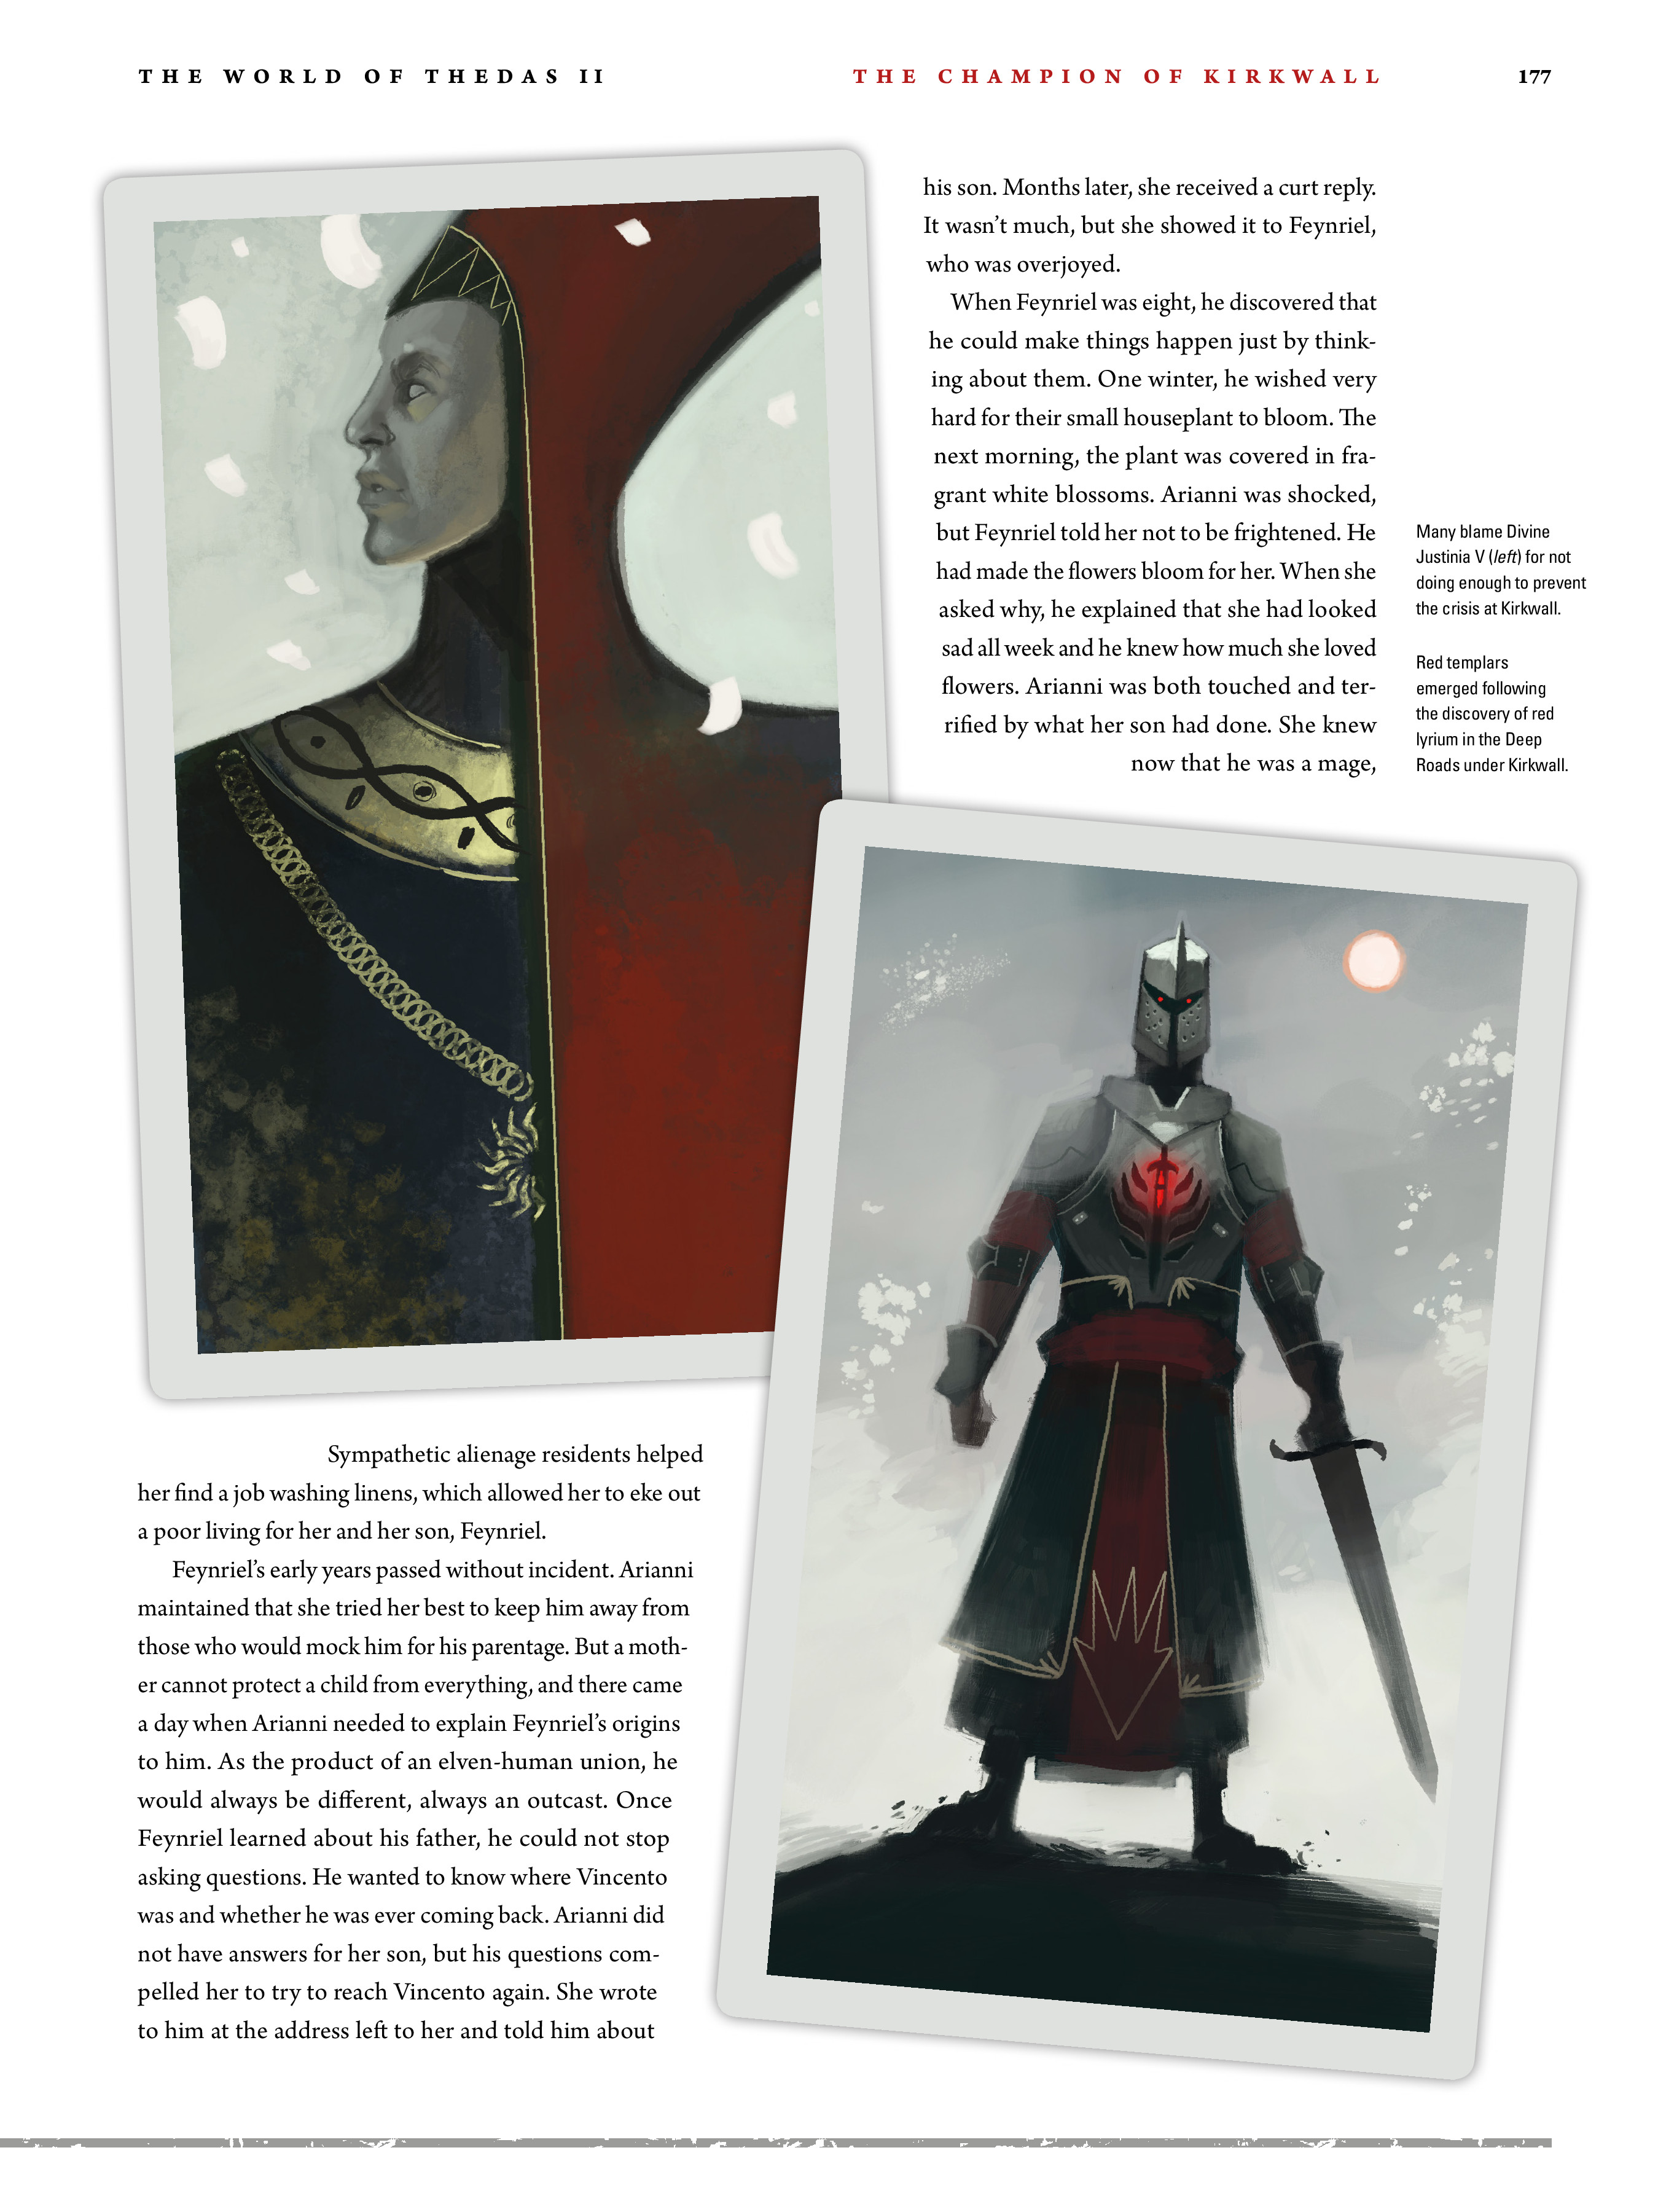 Read online Dragon Age: The World of Thedas comic -  Issue # TPB 2 - 172